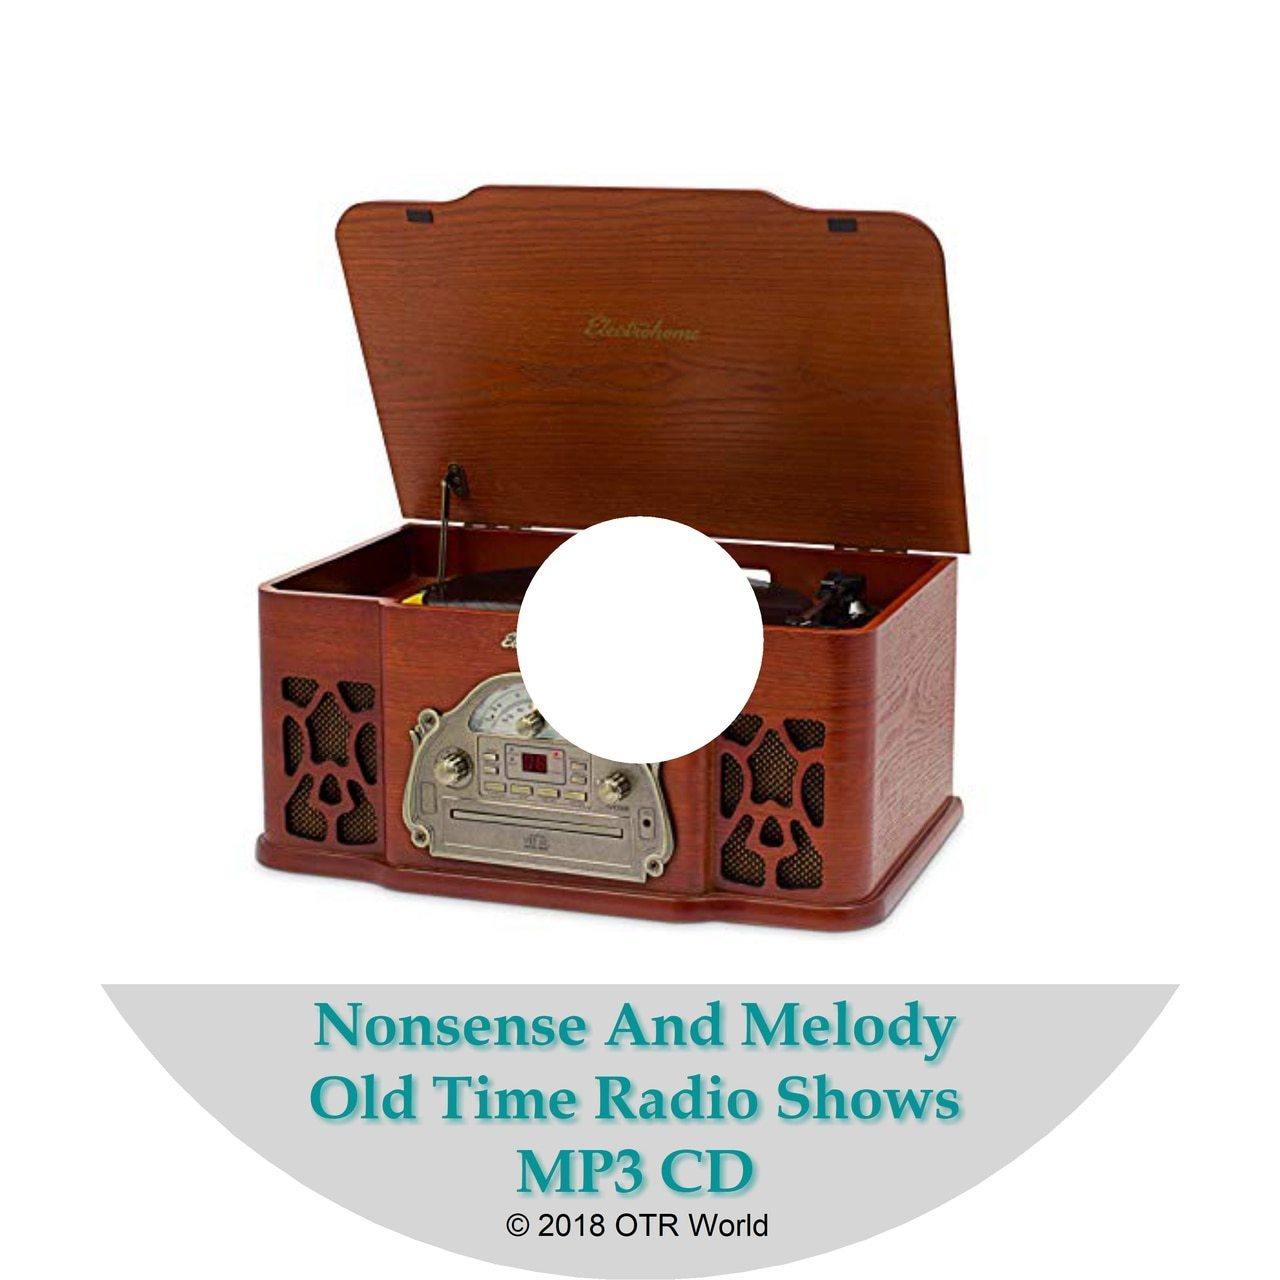 Nonsense And Melody Old Time Radio Shows OTR OTRS 21 Episodes MP3 CD-R - OTR World